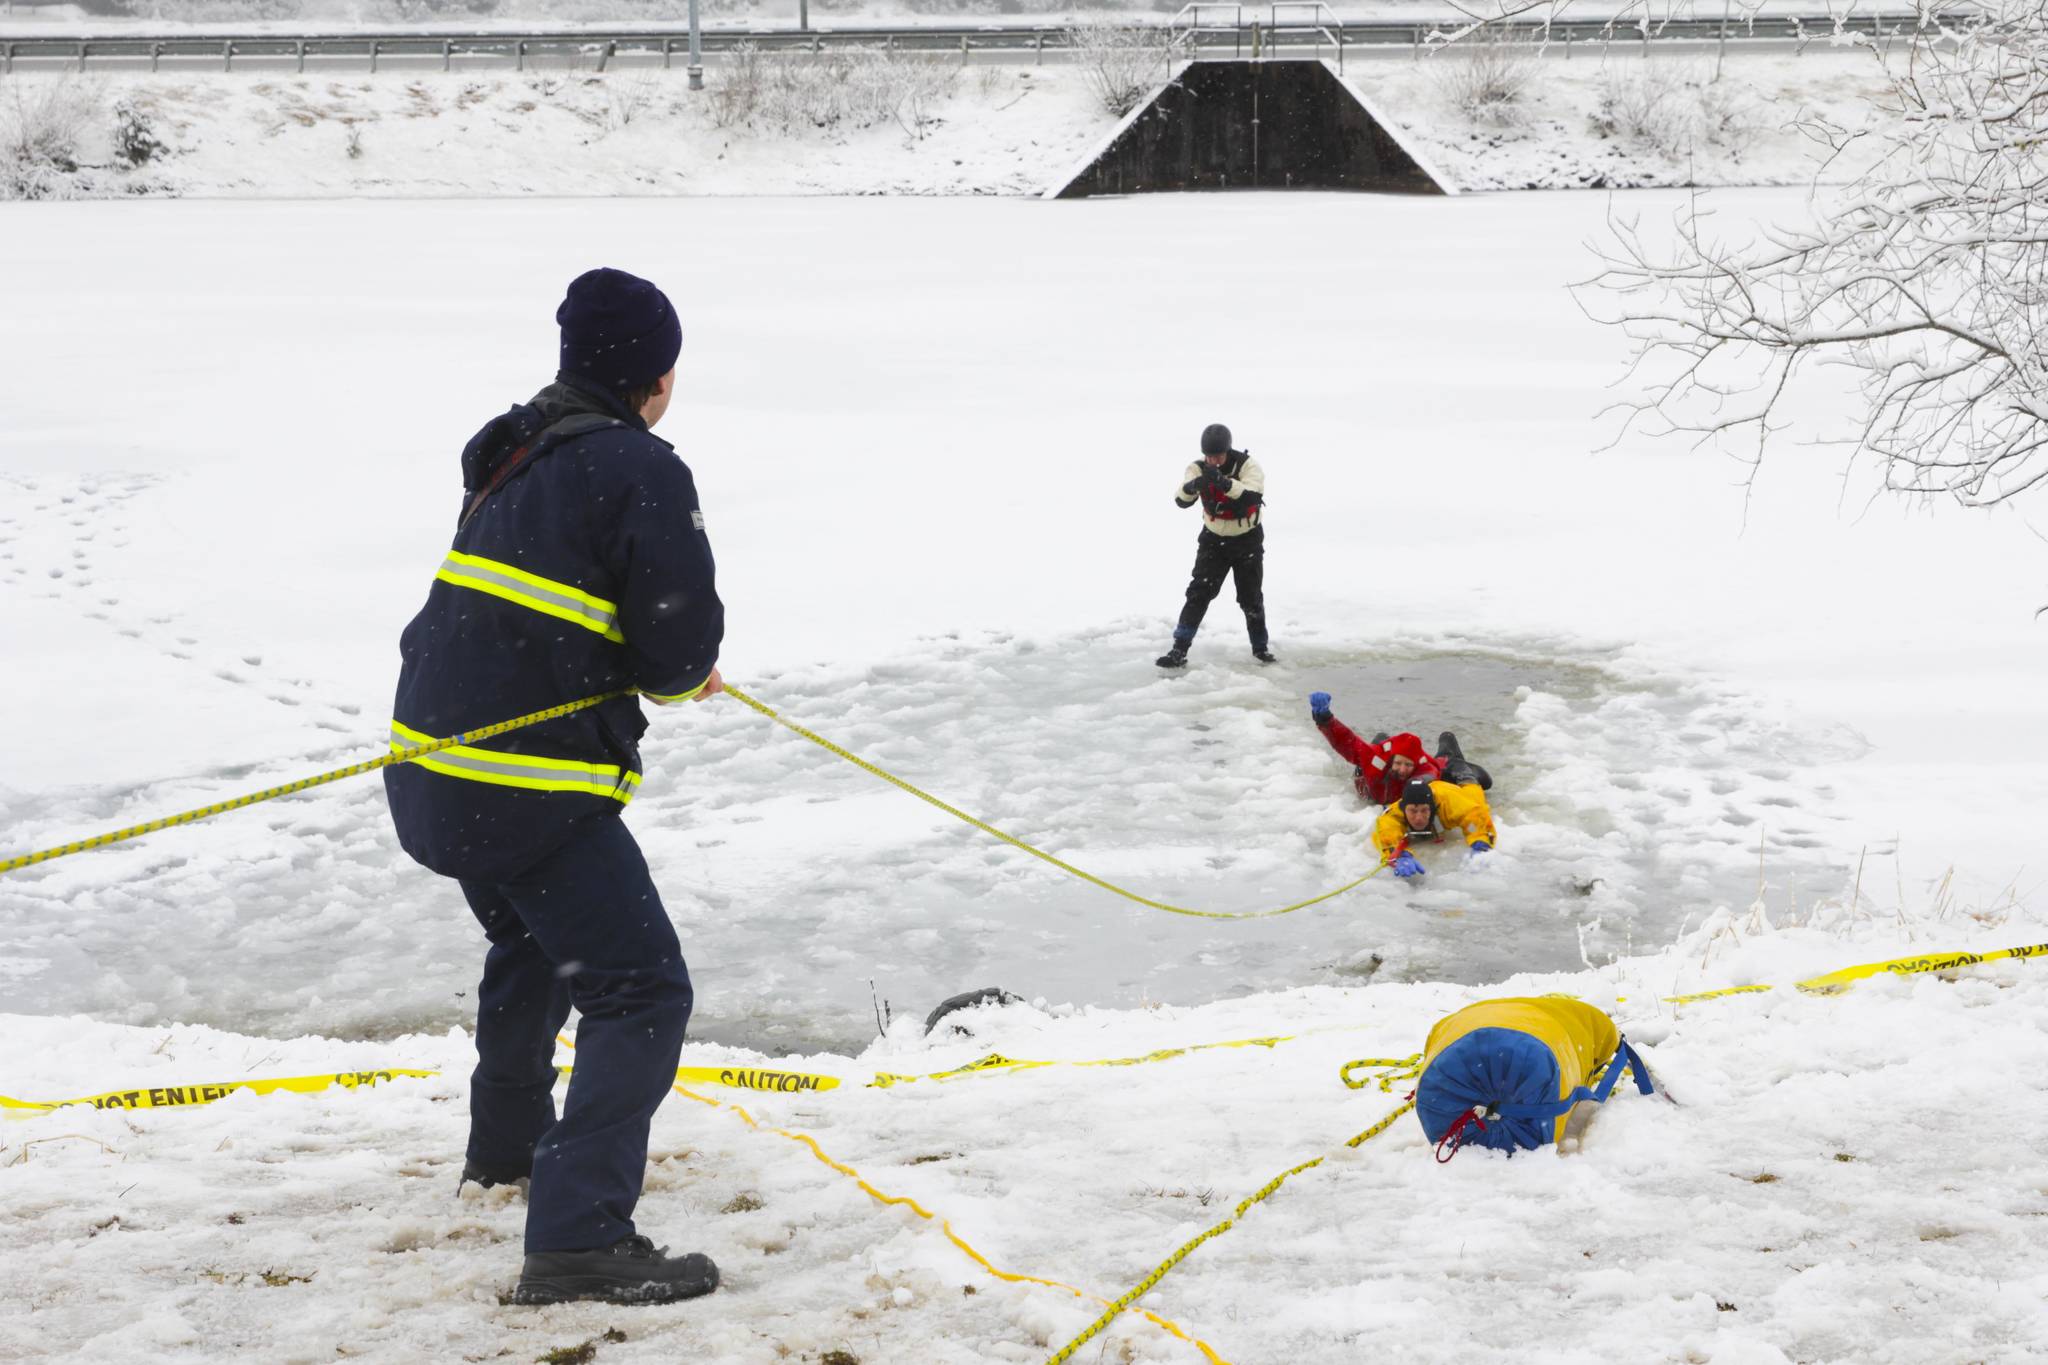 Capital City Fire/Rescue personnel underwent annual ice rescue training at Twin Lakes on April 7, 2021. The training occurs in the spring, when the ice is rotted and most dangerous. (Michael S. Lockett / Juneau Empire)